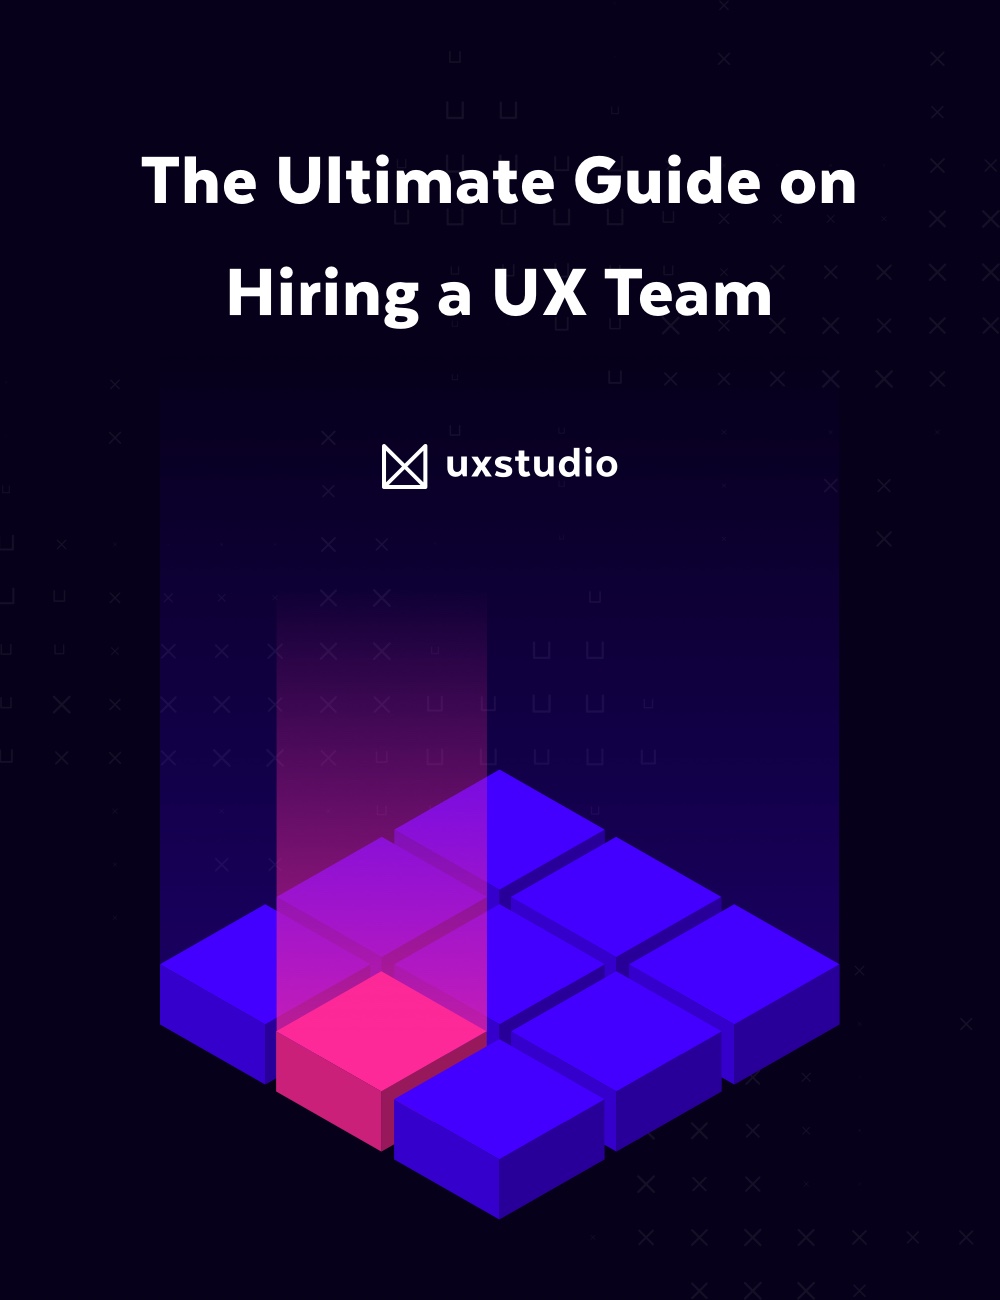 The Ultimate Guide on Hiring a UX Team